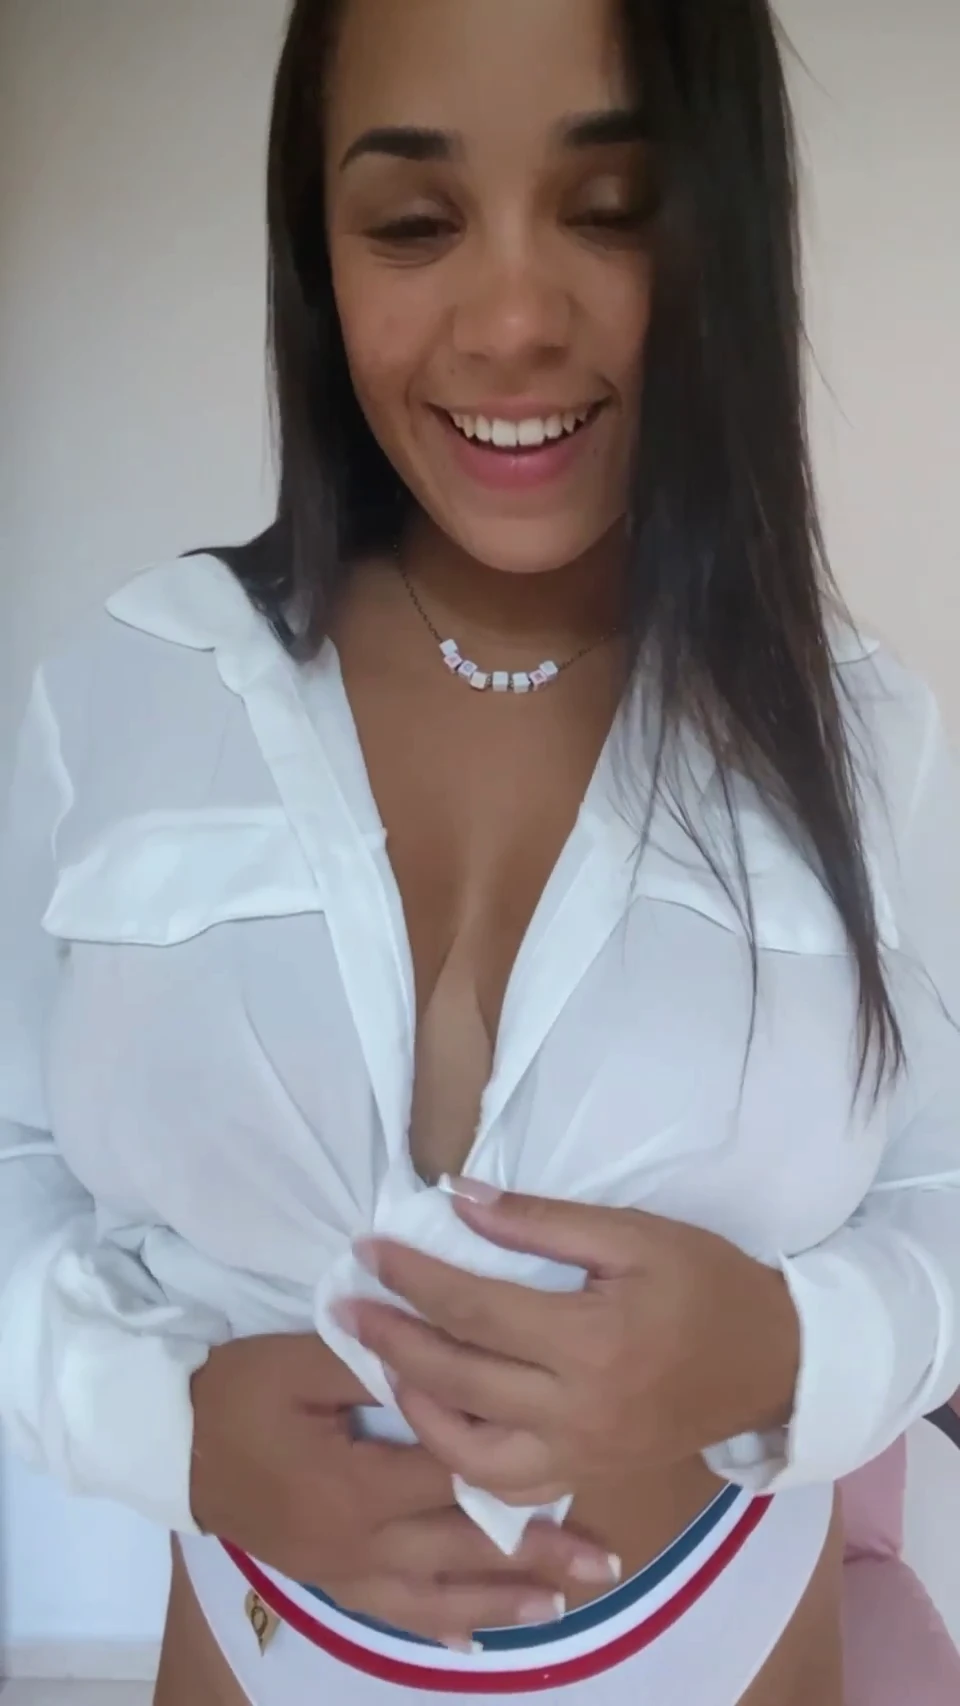 Would you fuck an average mommy like me?